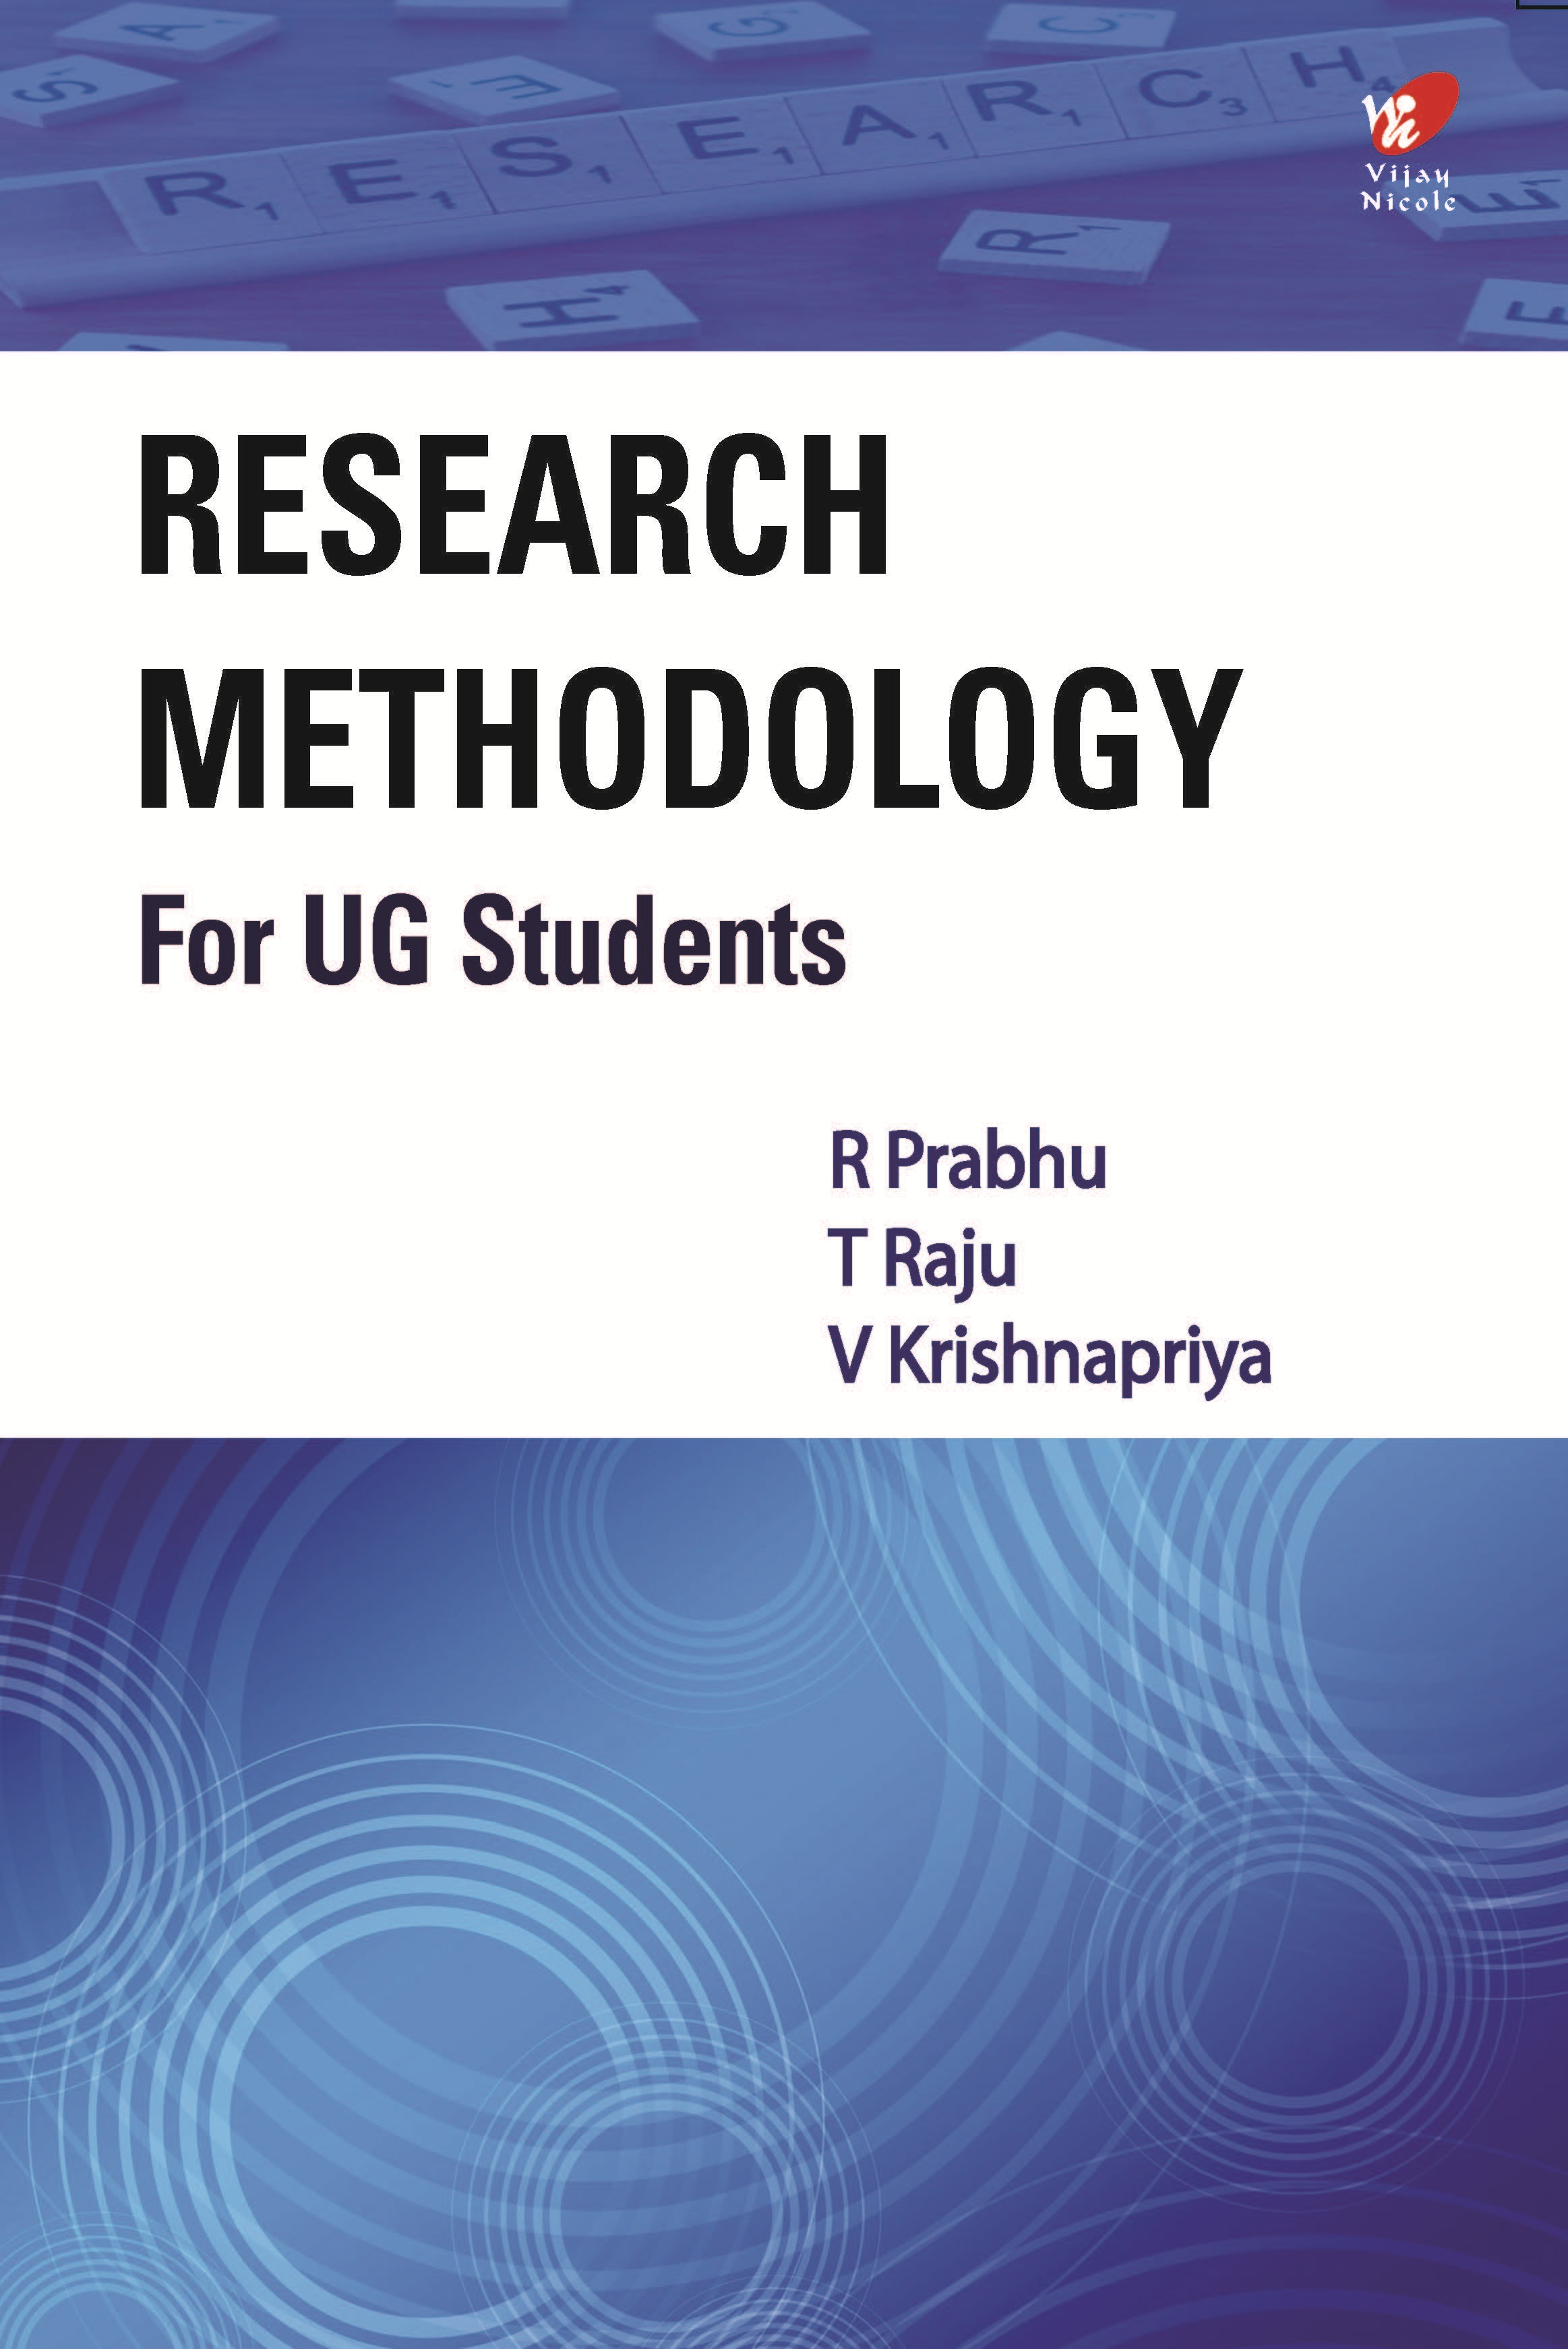 Research Methodology For UG Students